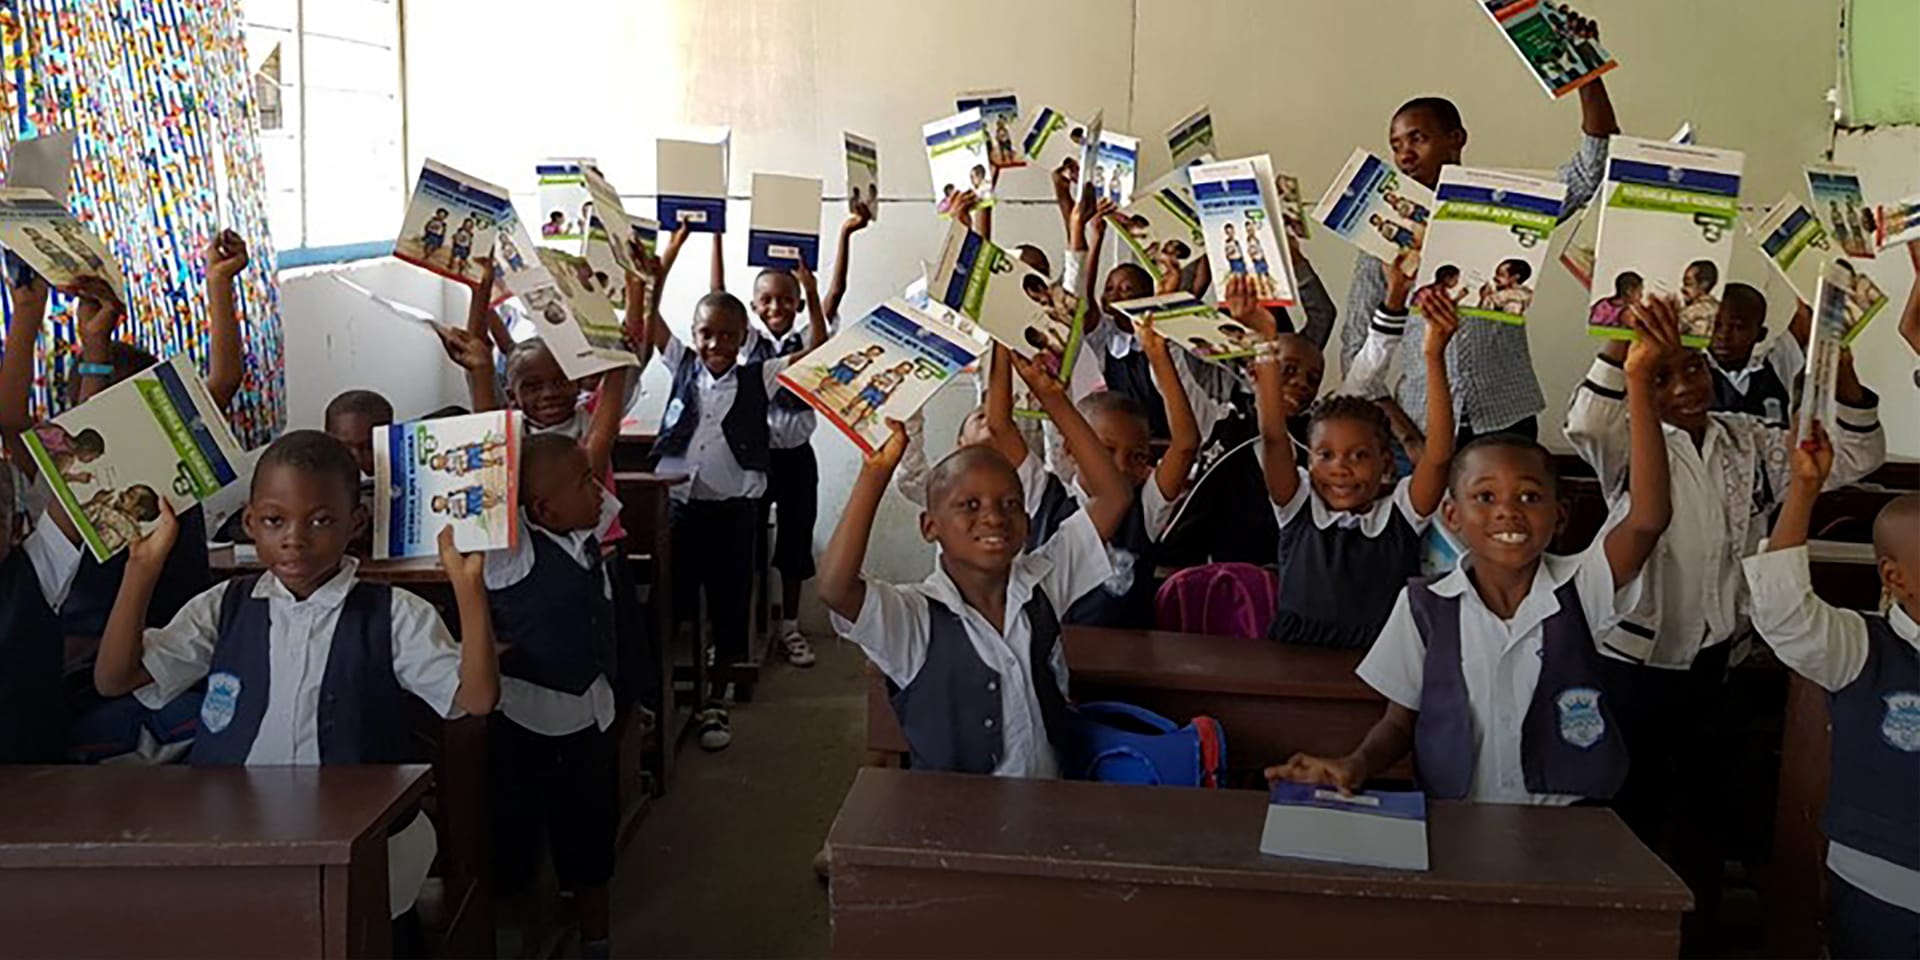 Children lift textbooks happily above their heads.